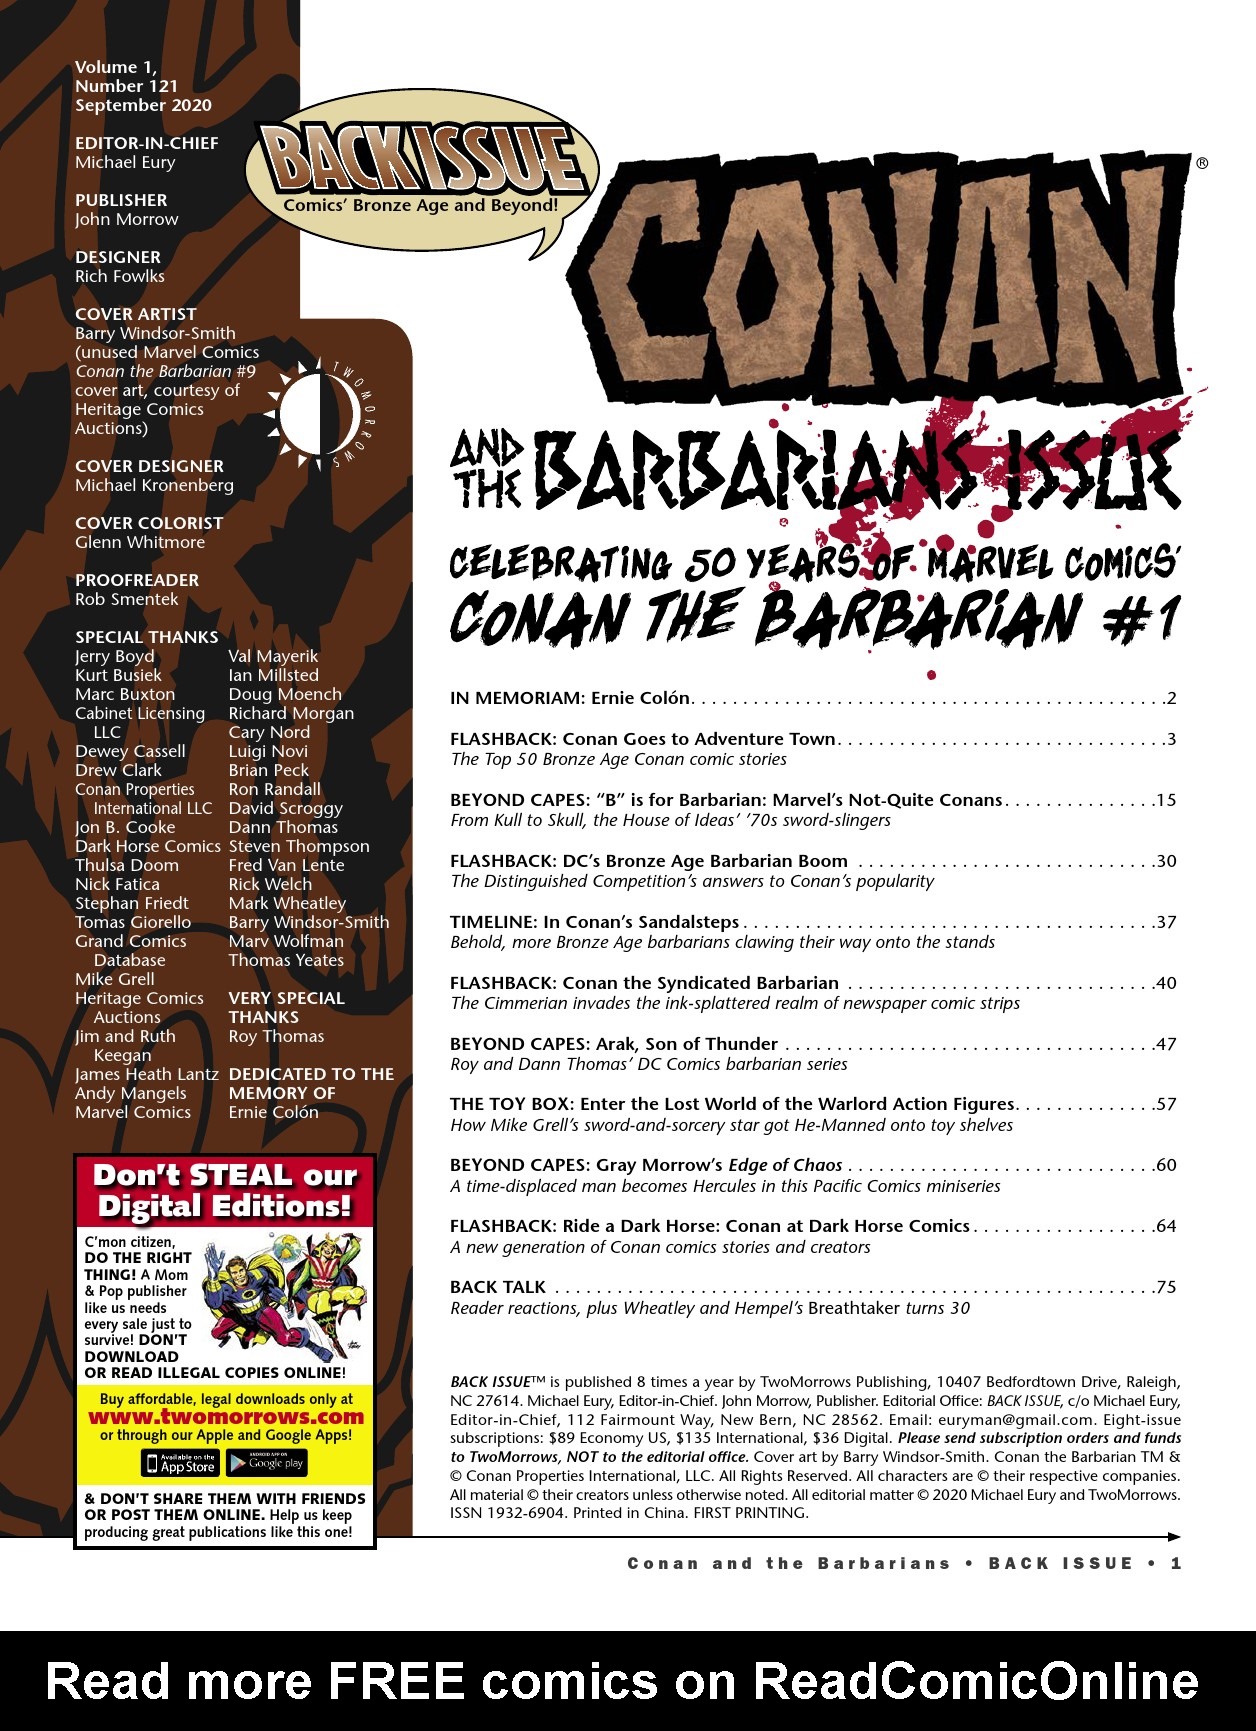 Read online Back Issue comic -  Issue #121 - 3